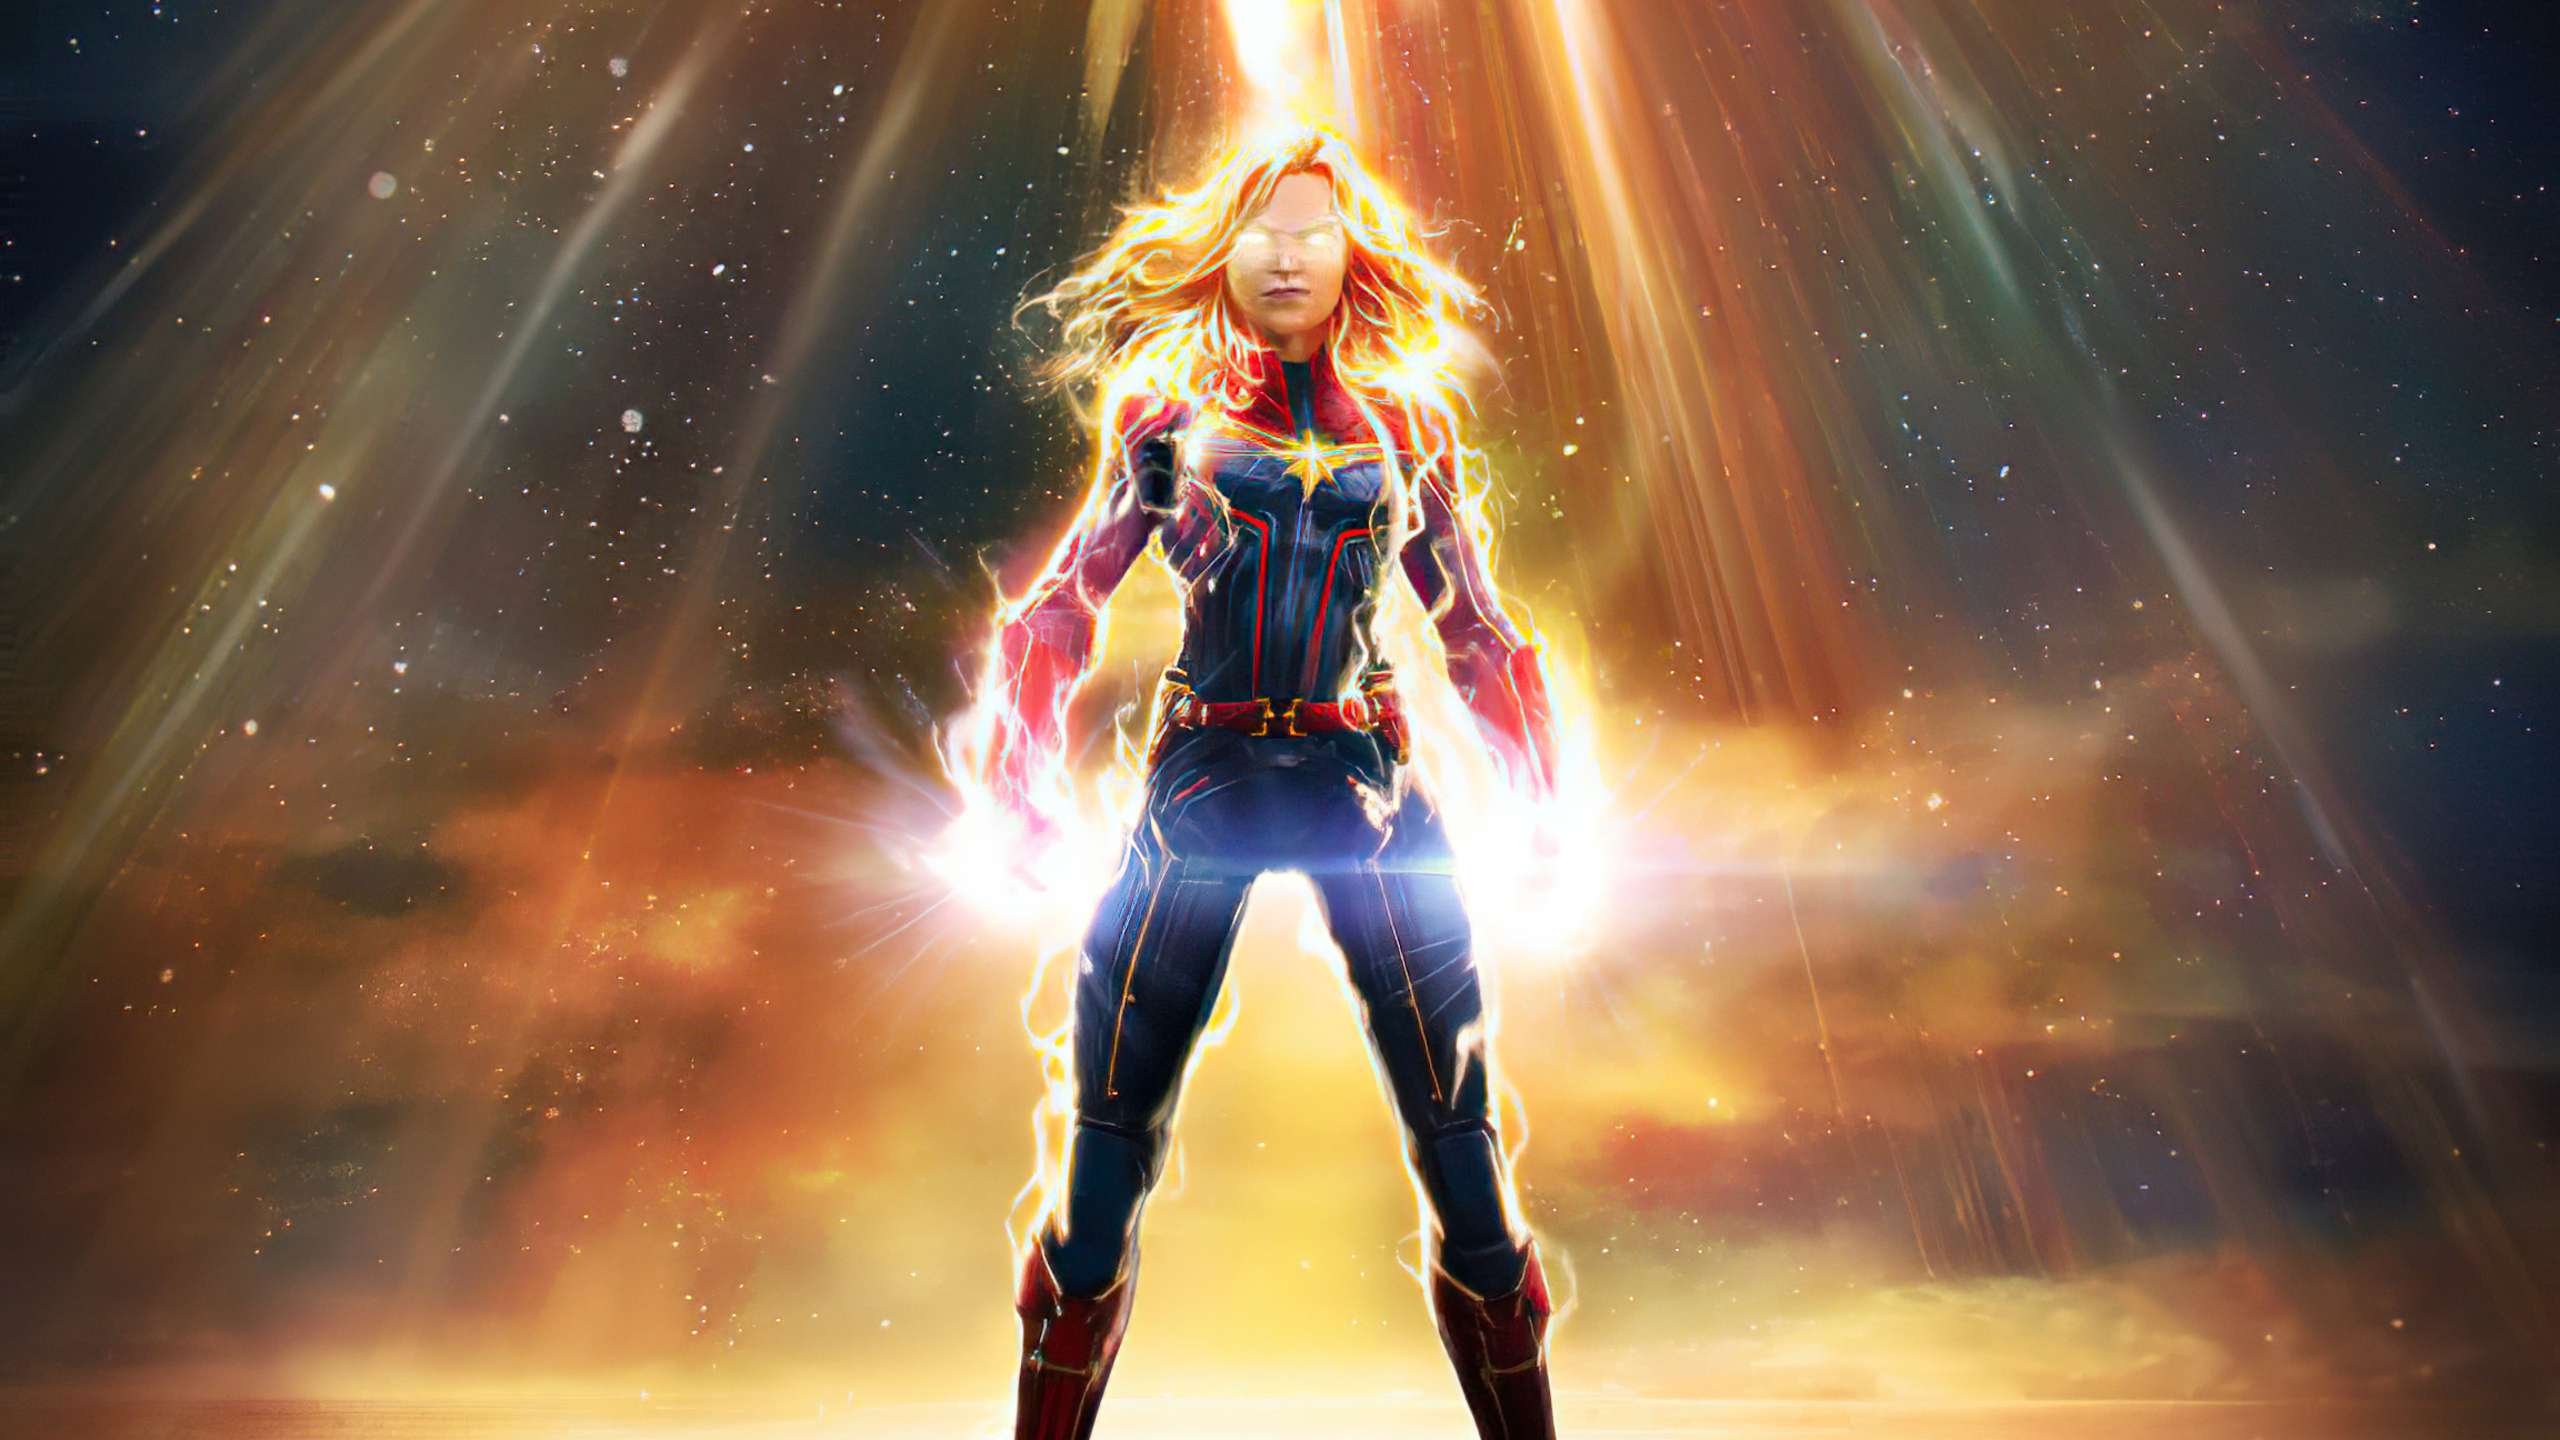 Captain Marvel Marvel Contest Of Champions 2020 In 2560x1440 Resolution. ca...